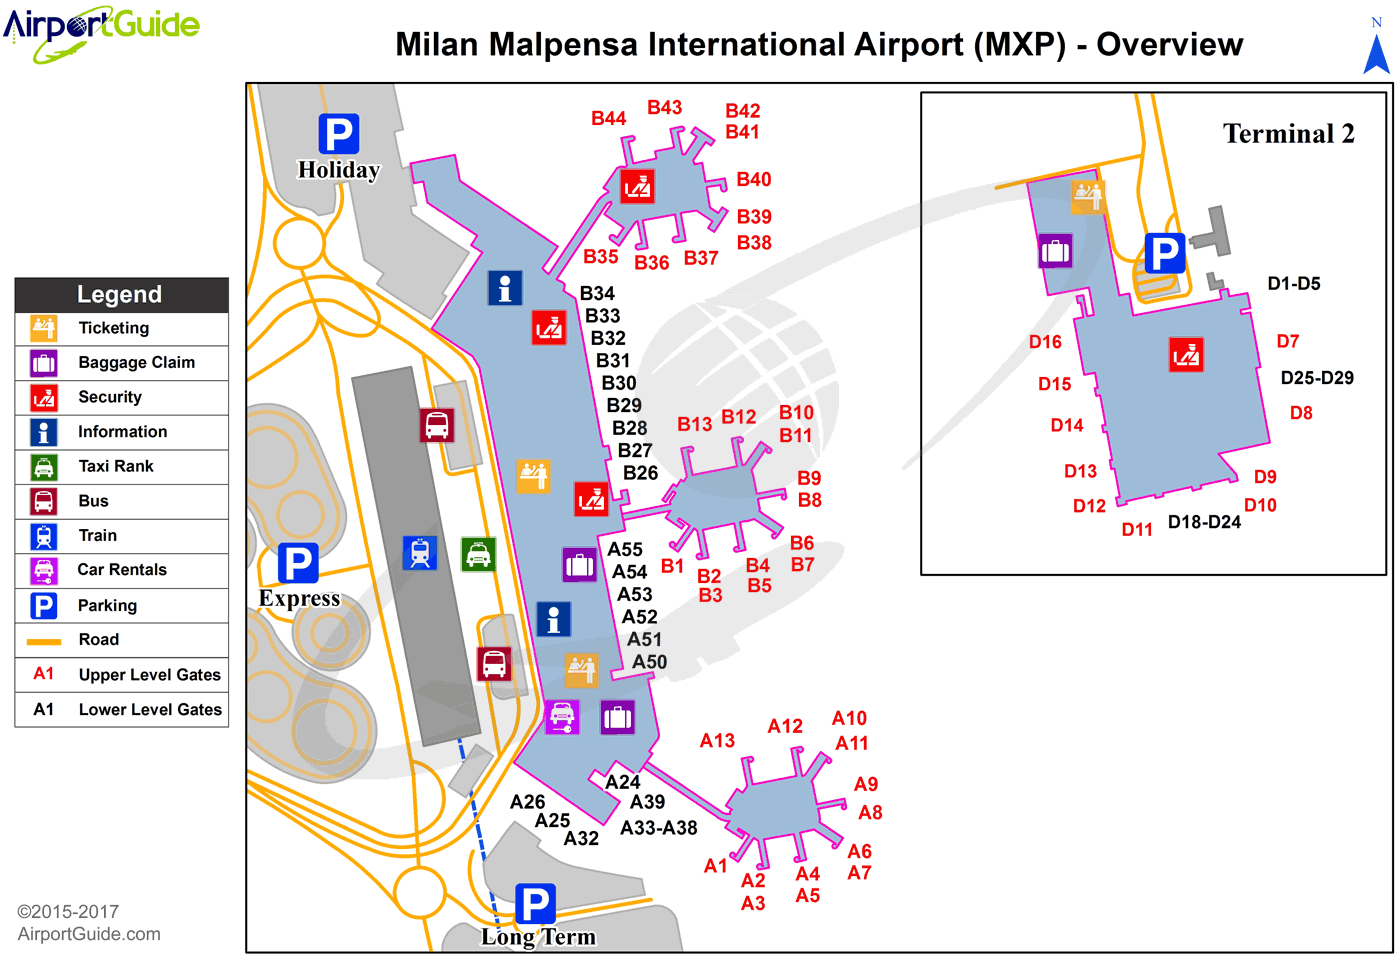 MXP Overview Map 